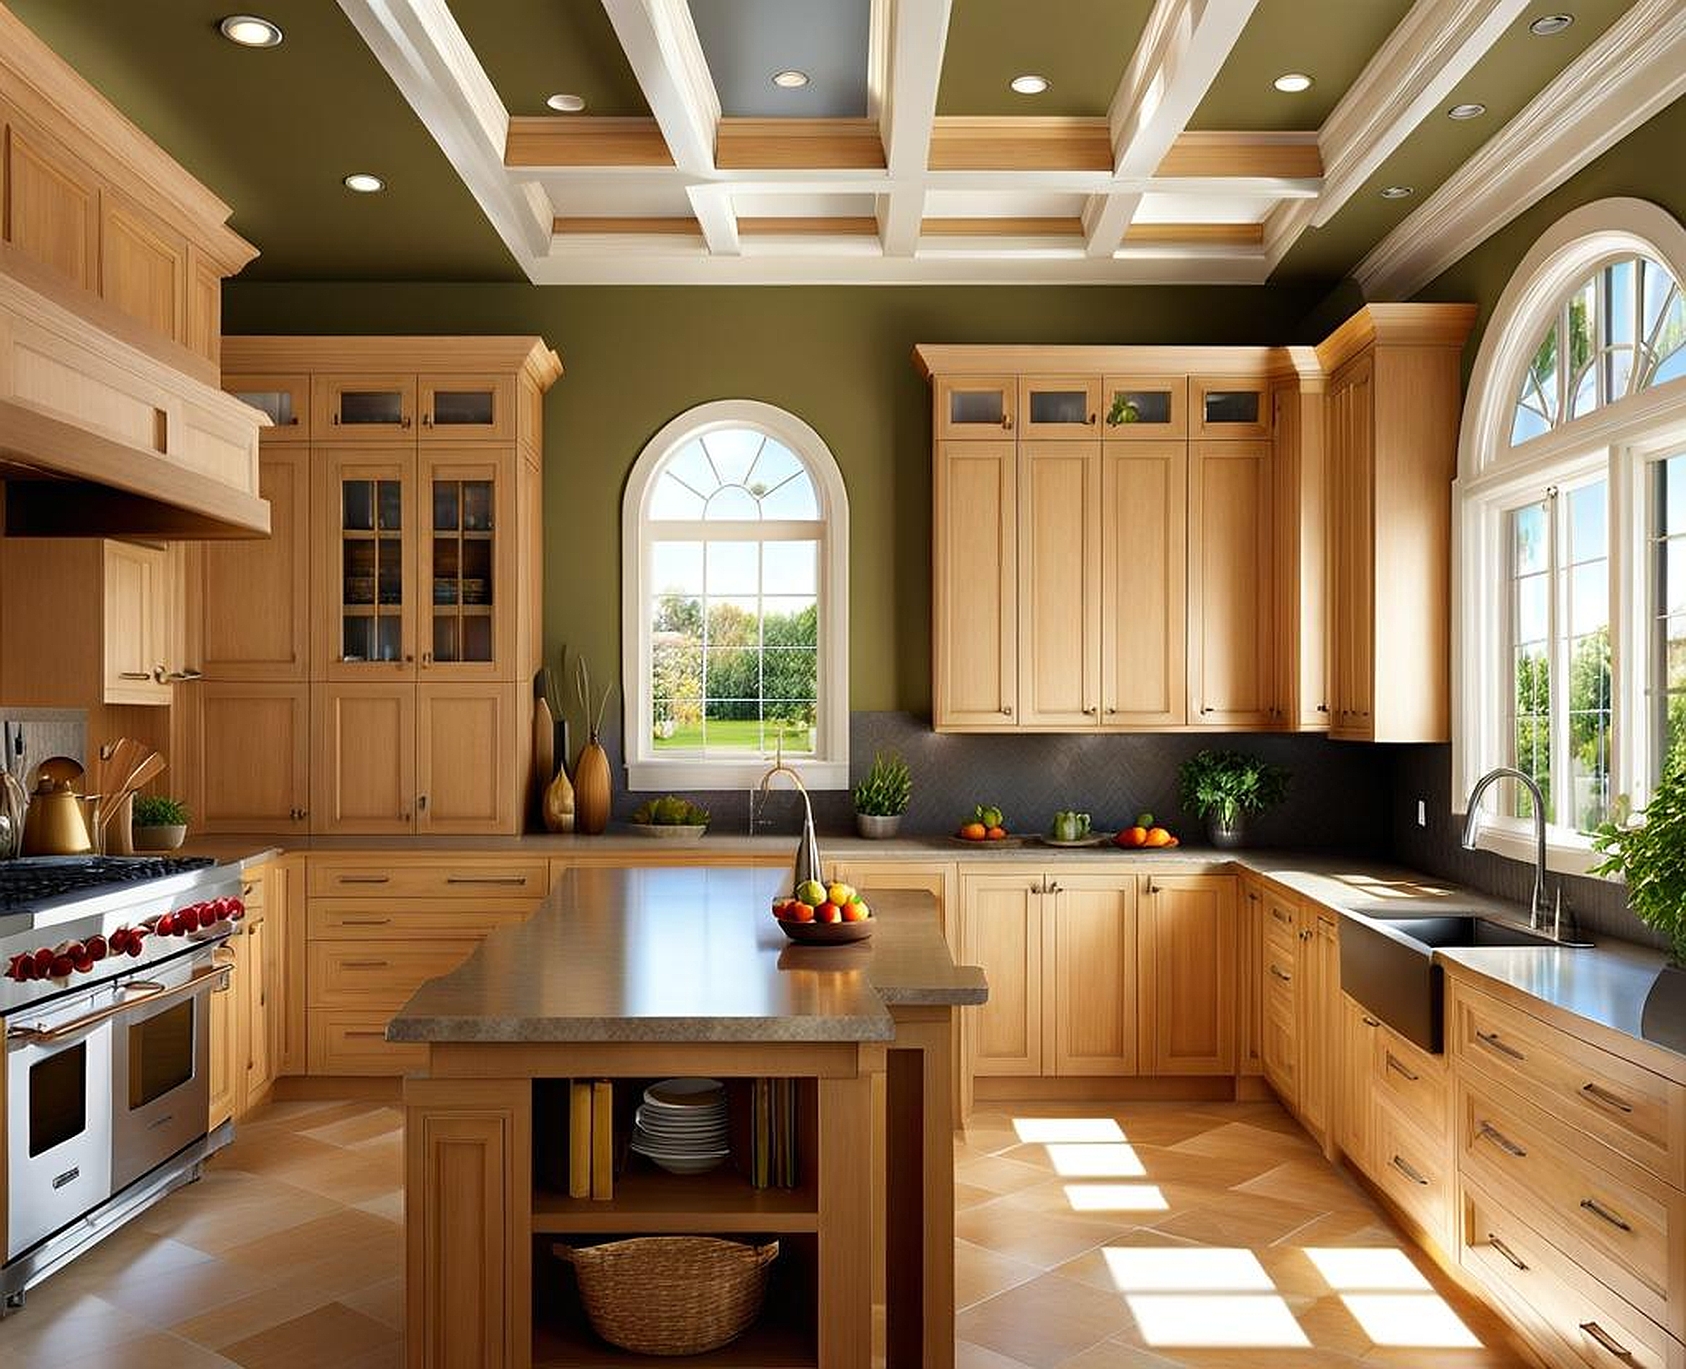 ceiling options for kitchen